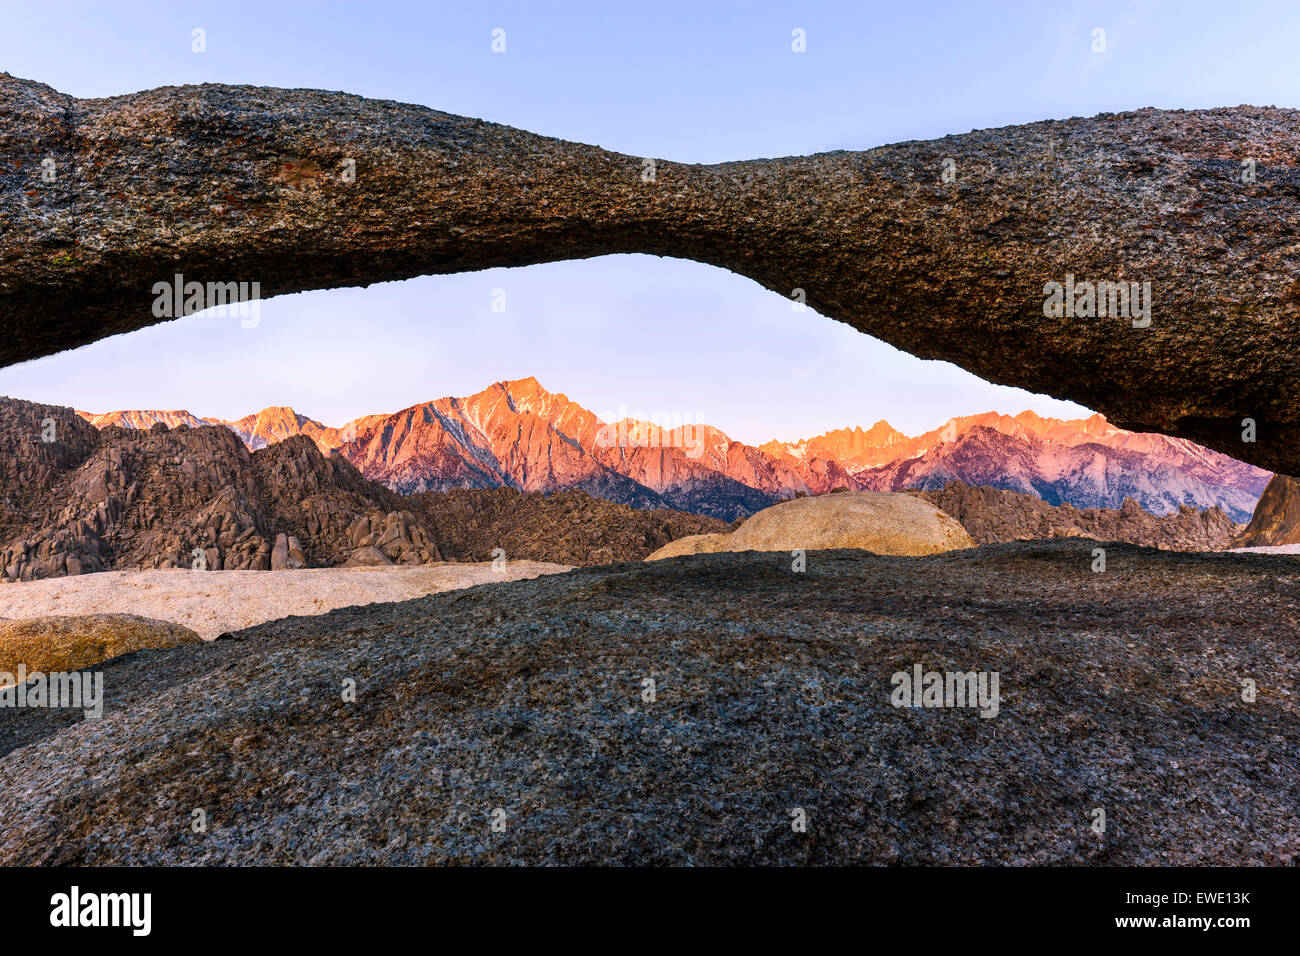 Sunrise at Lathe Arch in the Alabama Hills with the view towards the Sierra Nevada, California, USA. Stock Photo